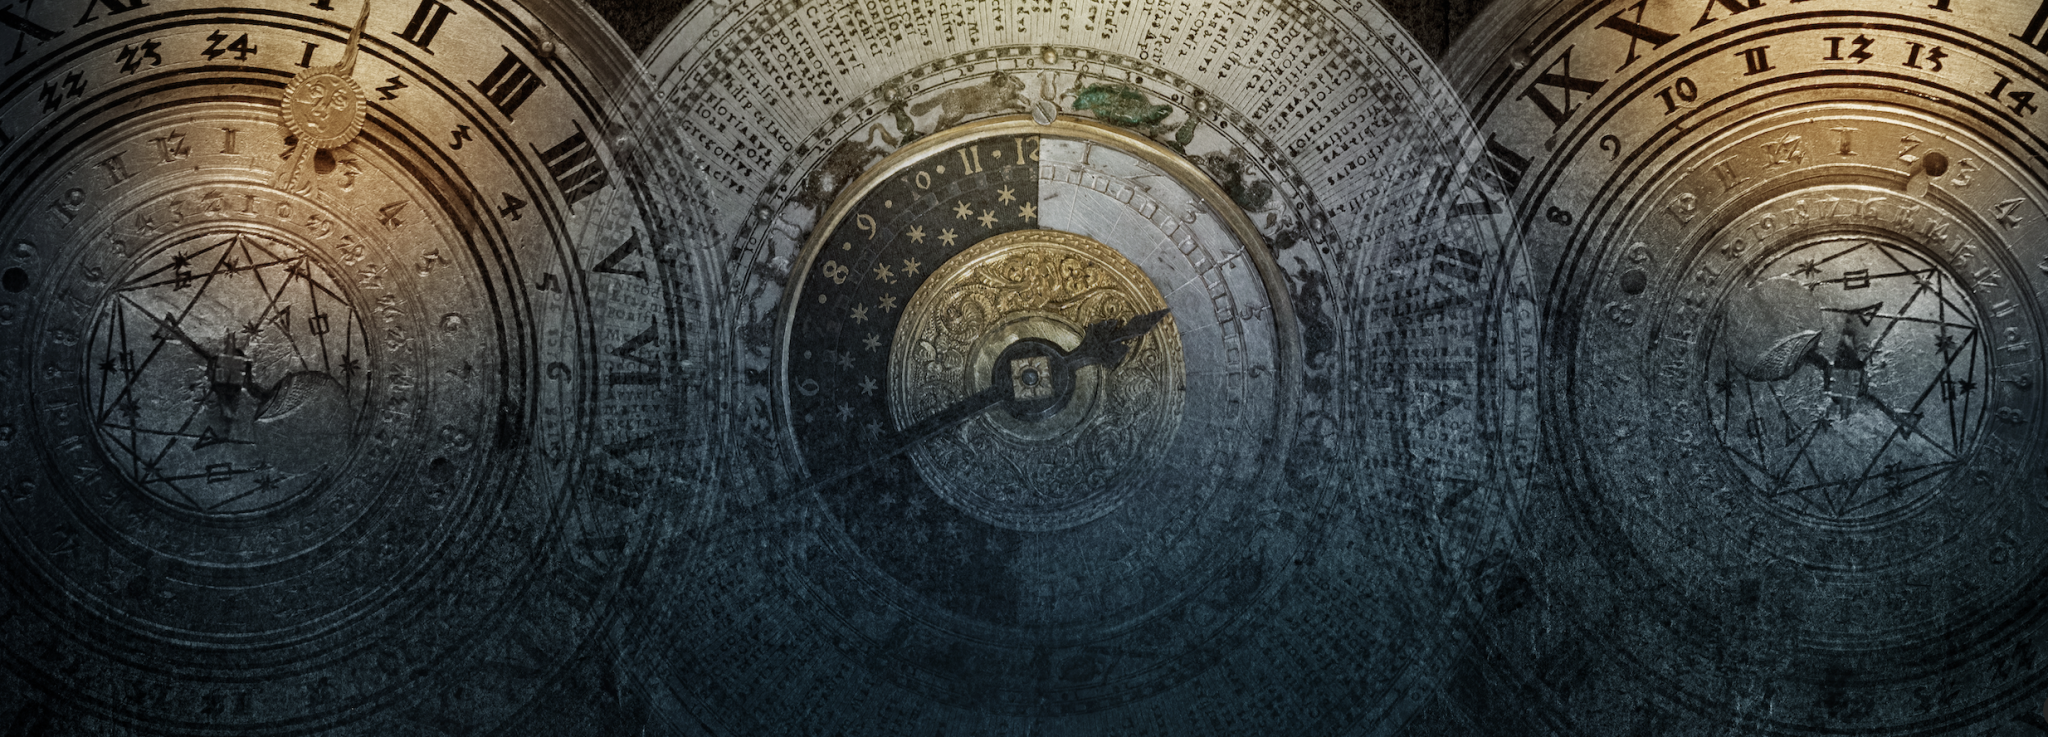 Ancient calendar with constellations and astronomical instruments against the old paper background. Symbol of science, astronomy, astrology, mystery, education, mysticism, numerology, occultism.